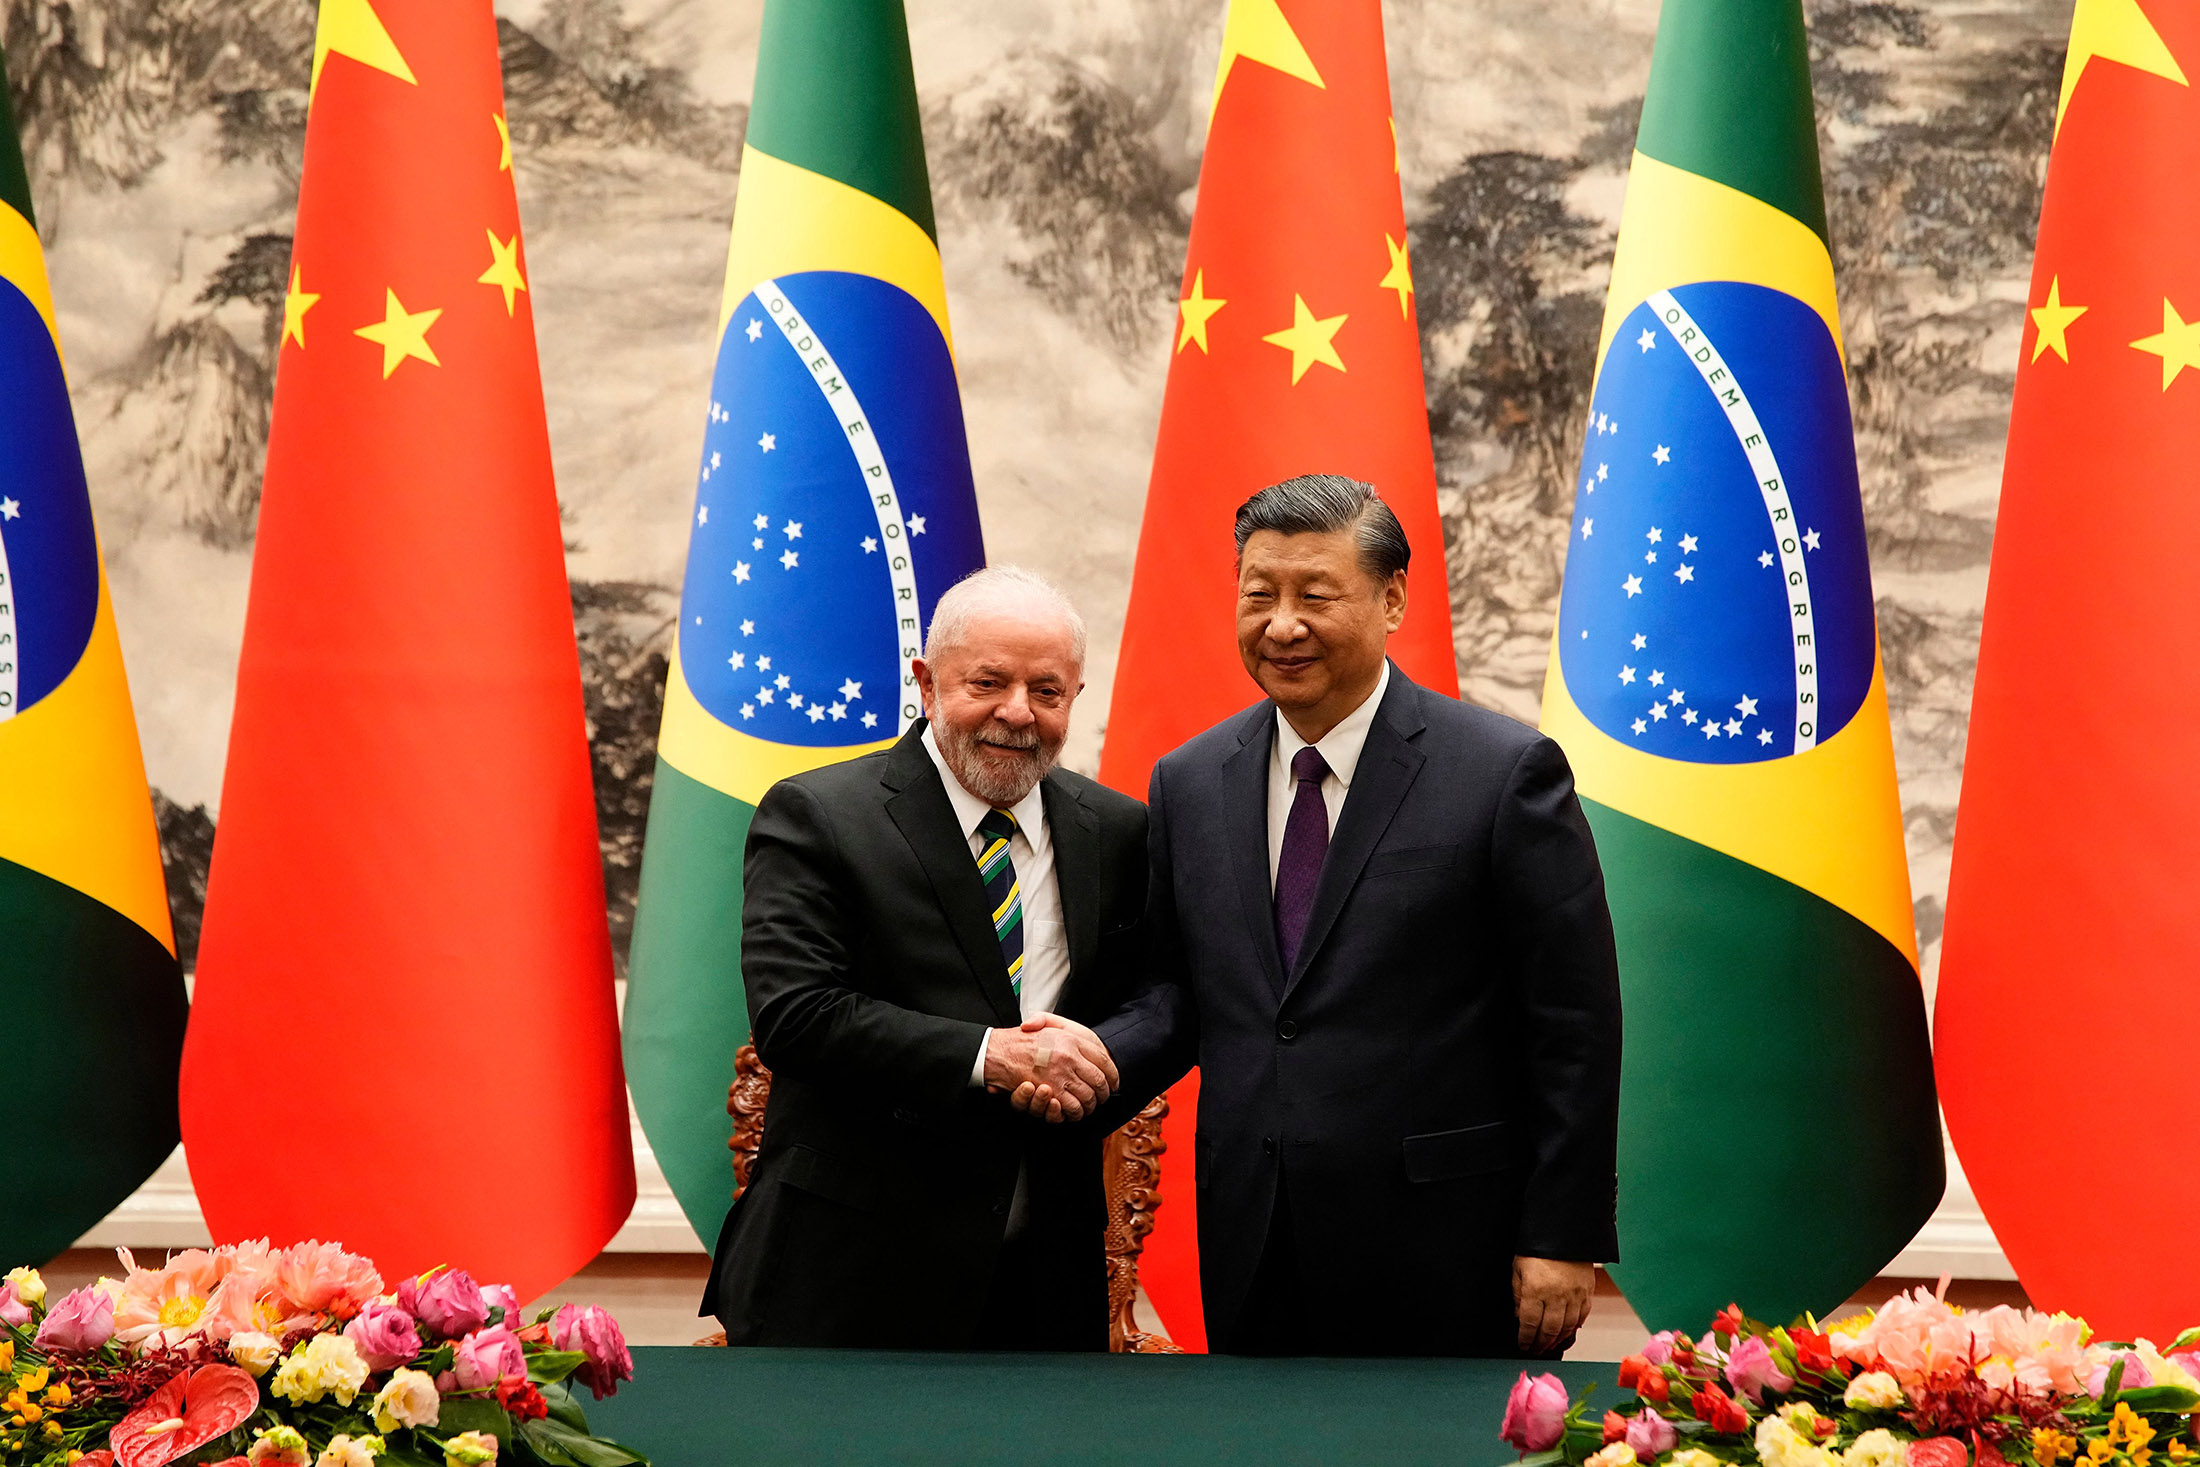 Xi Jinping and Luiz Inacio Lula da Silva shake hands after a signing ceremony at the Great Hall of the People in Beijing on April 14.